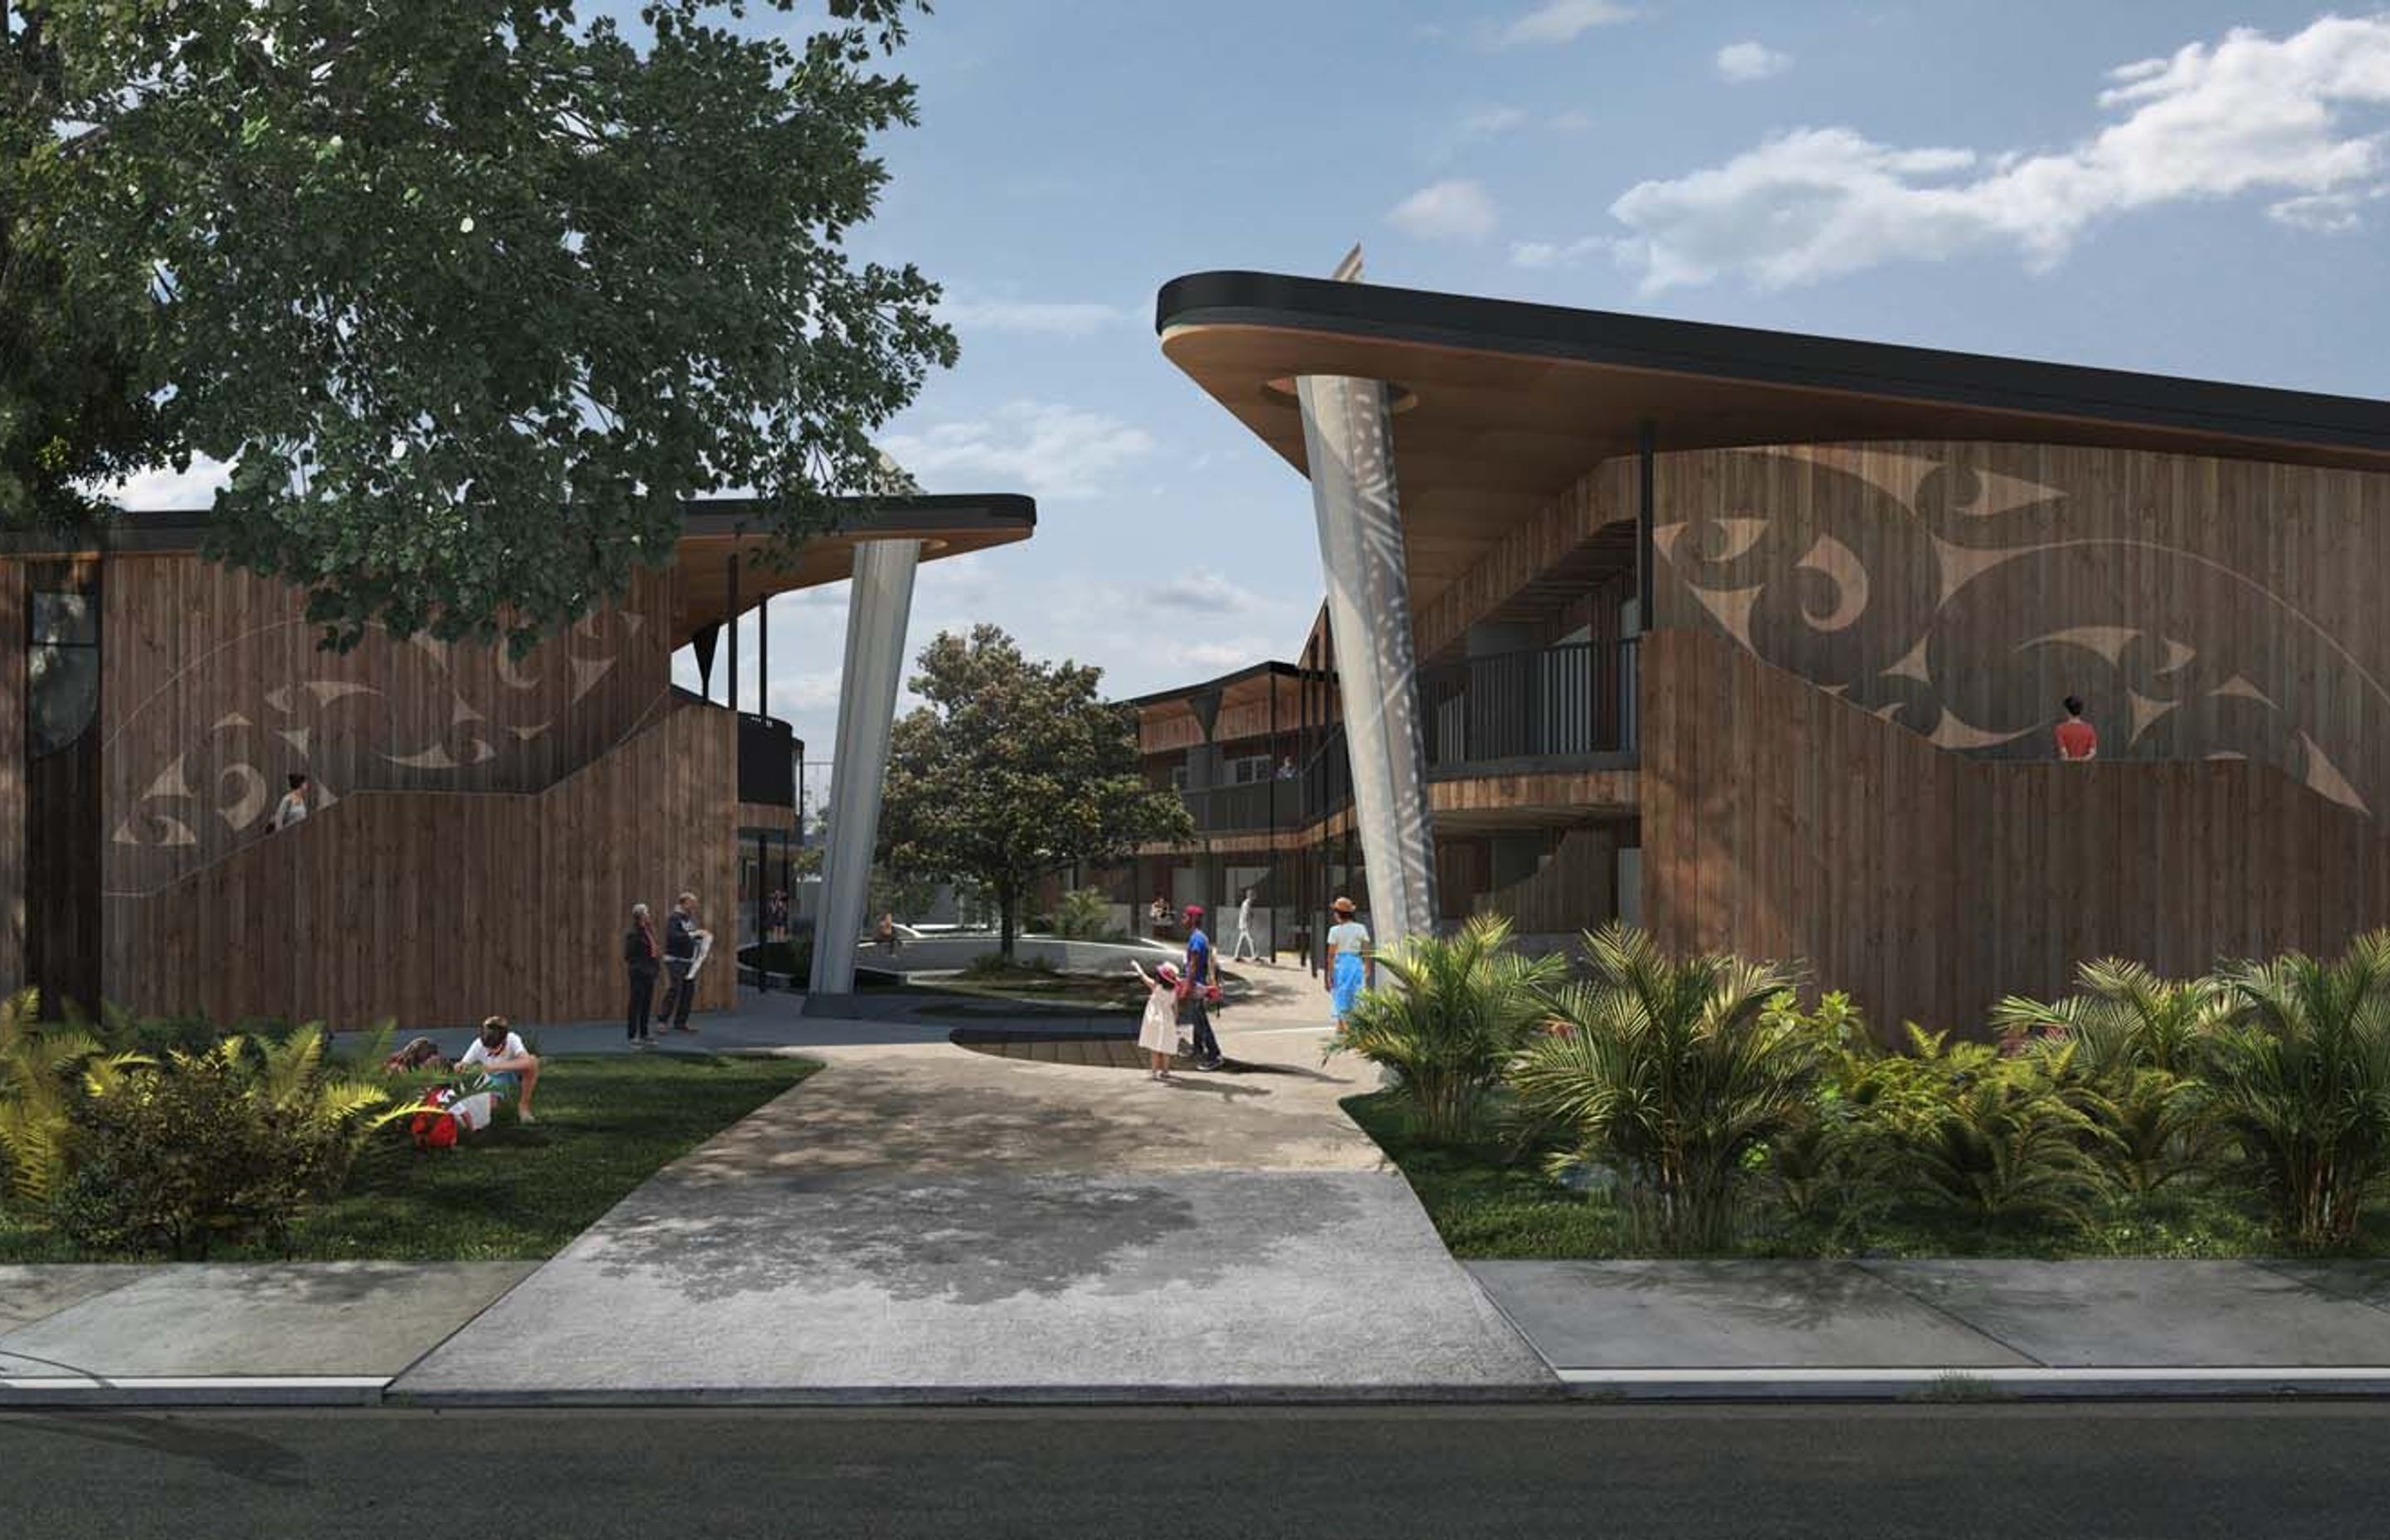 TOA Architects' concept design for a complex that provides social housing in South Auckland.